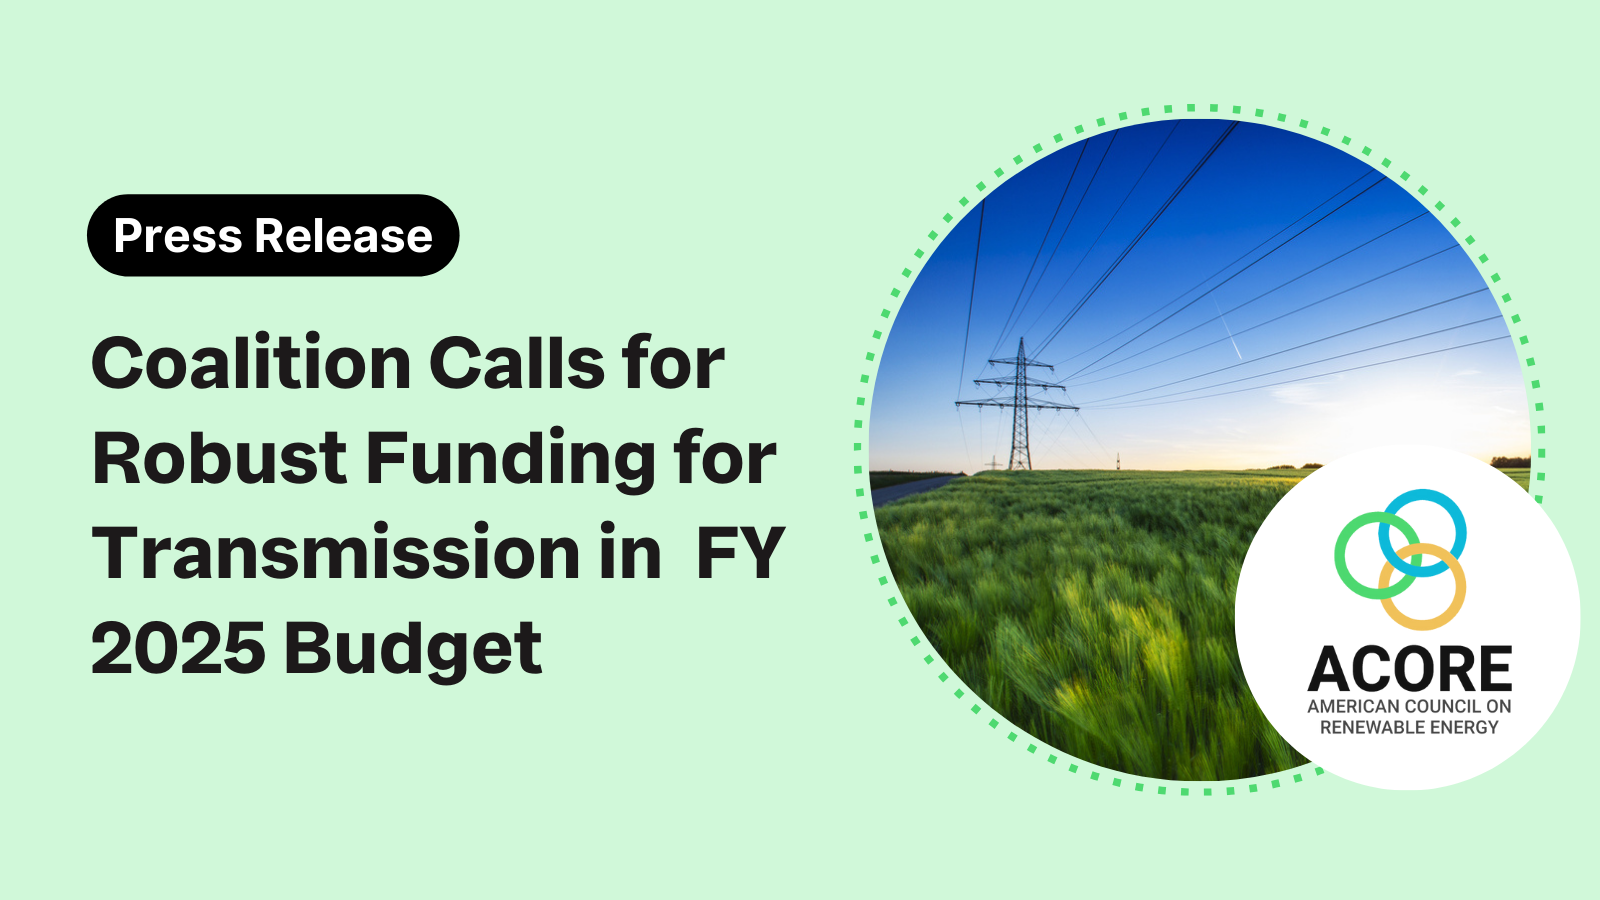 Coalition Calls for Robust Funding for Transmission in FY 2025 Budget